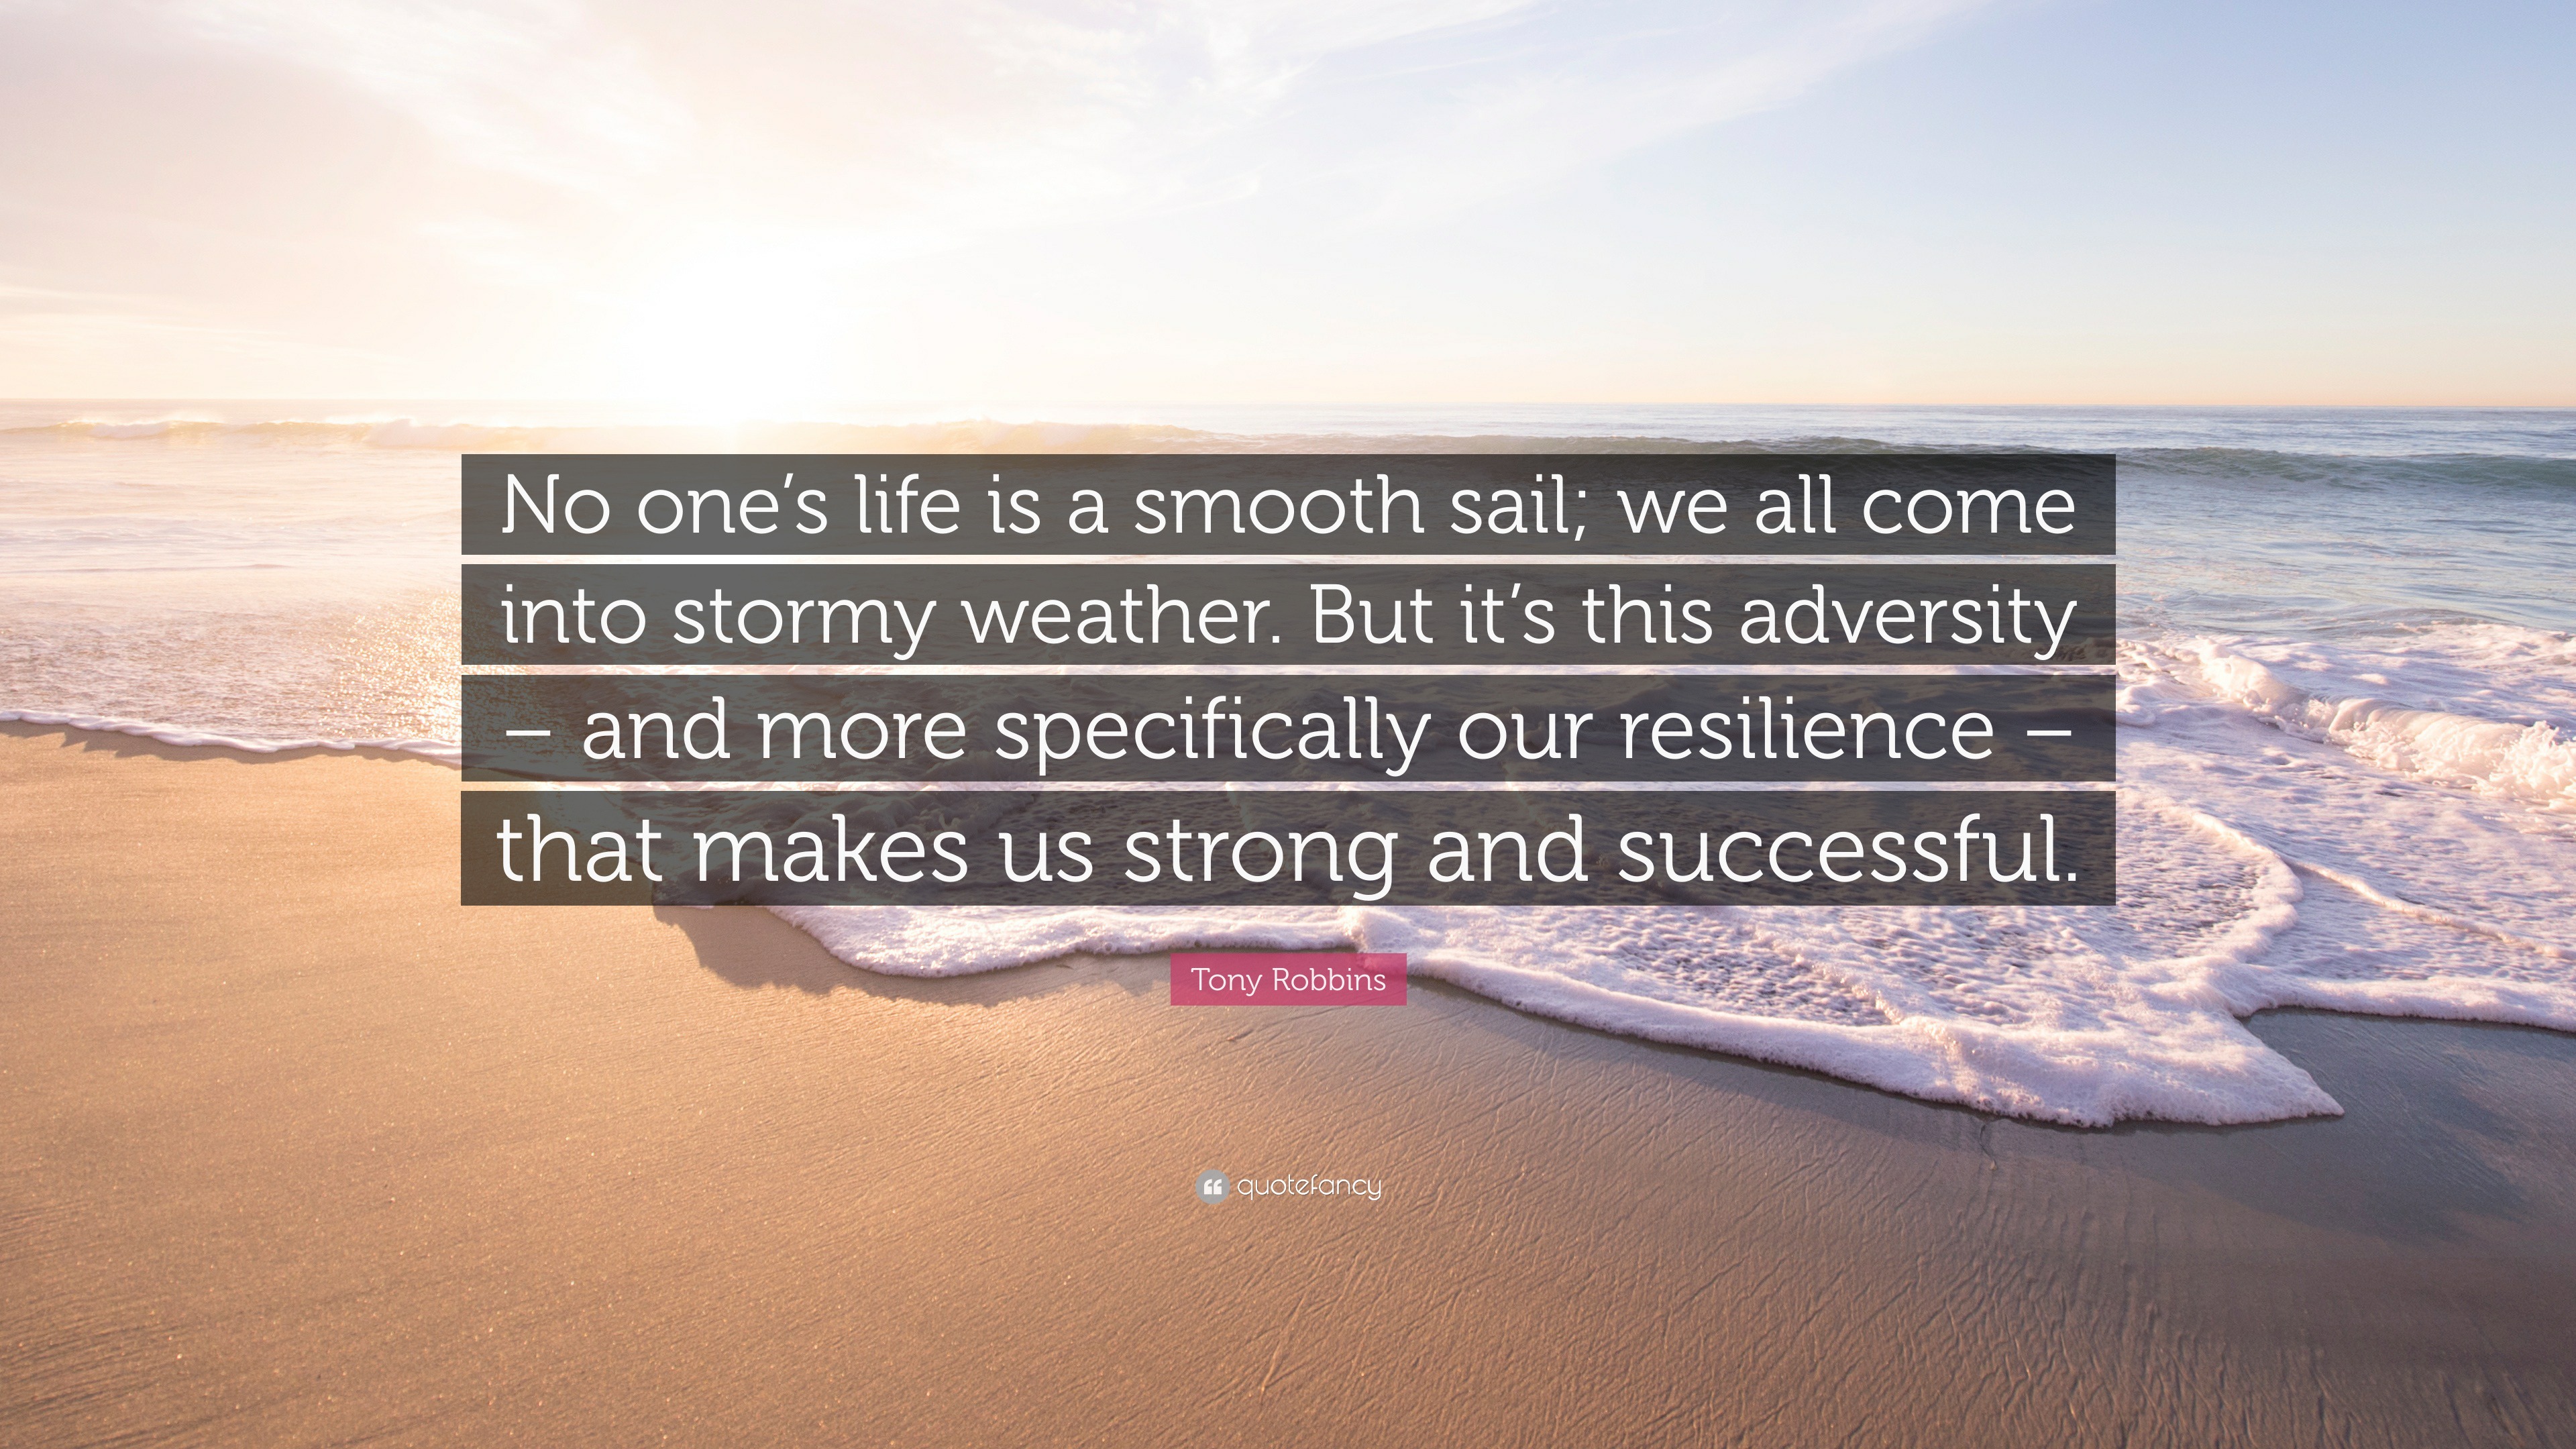 Tony Robbins Quote: “No one's life is a smooth sail; we all come